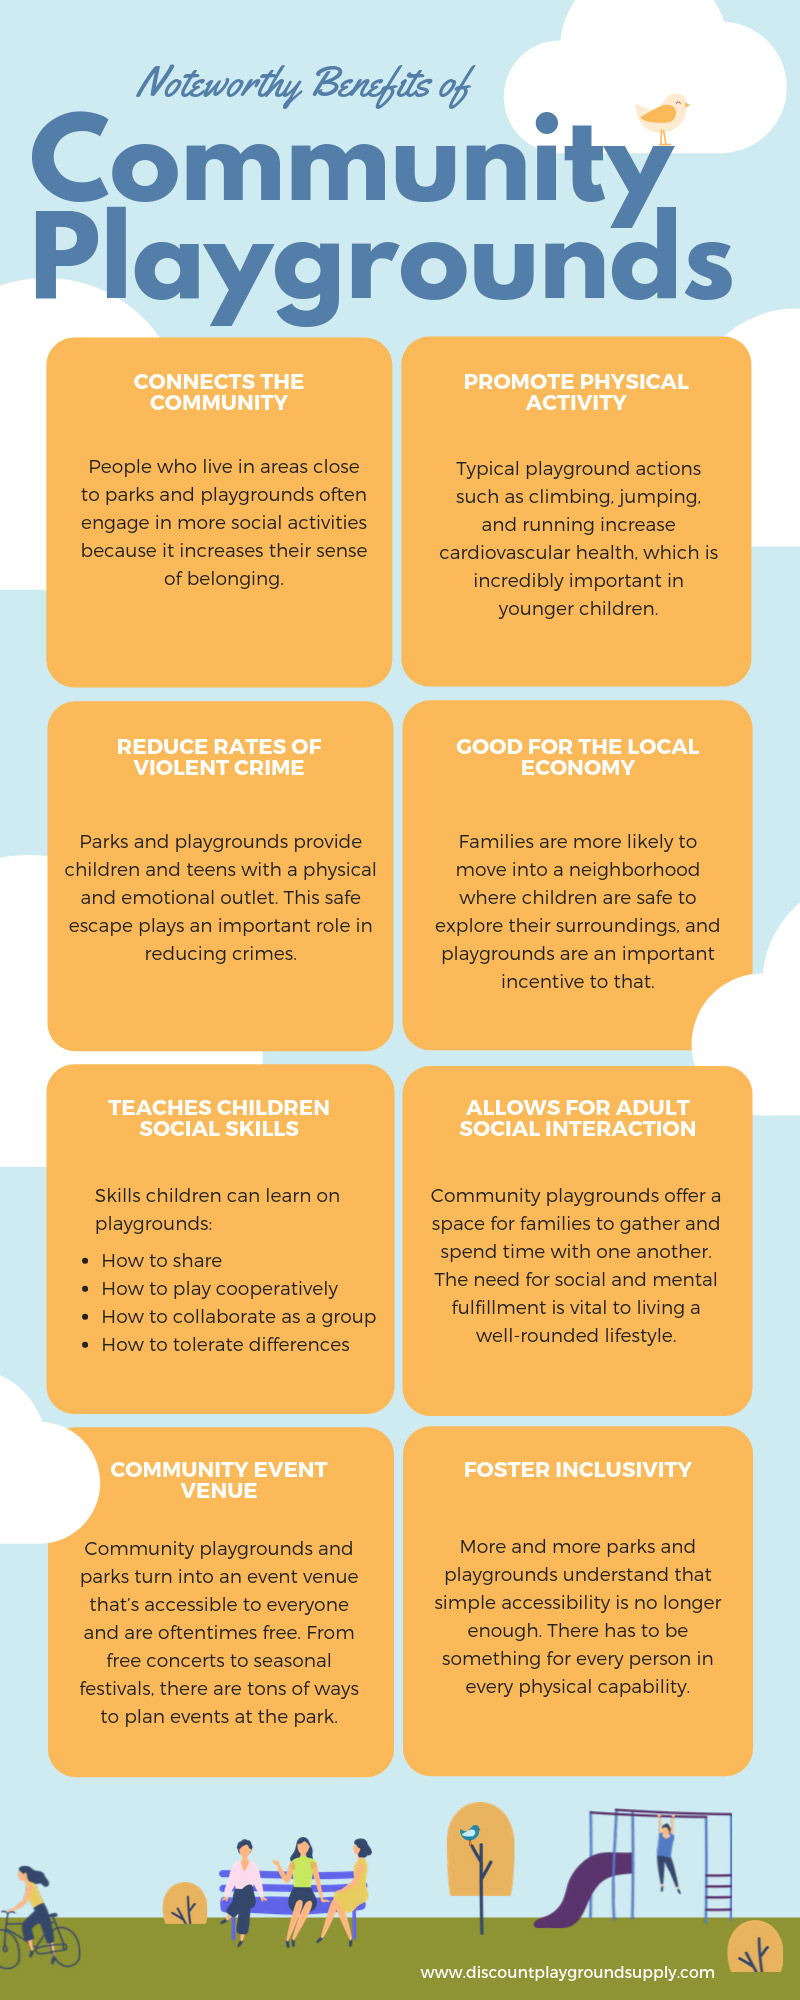 Noteworthy Benefits of Community Playgrounds infographic